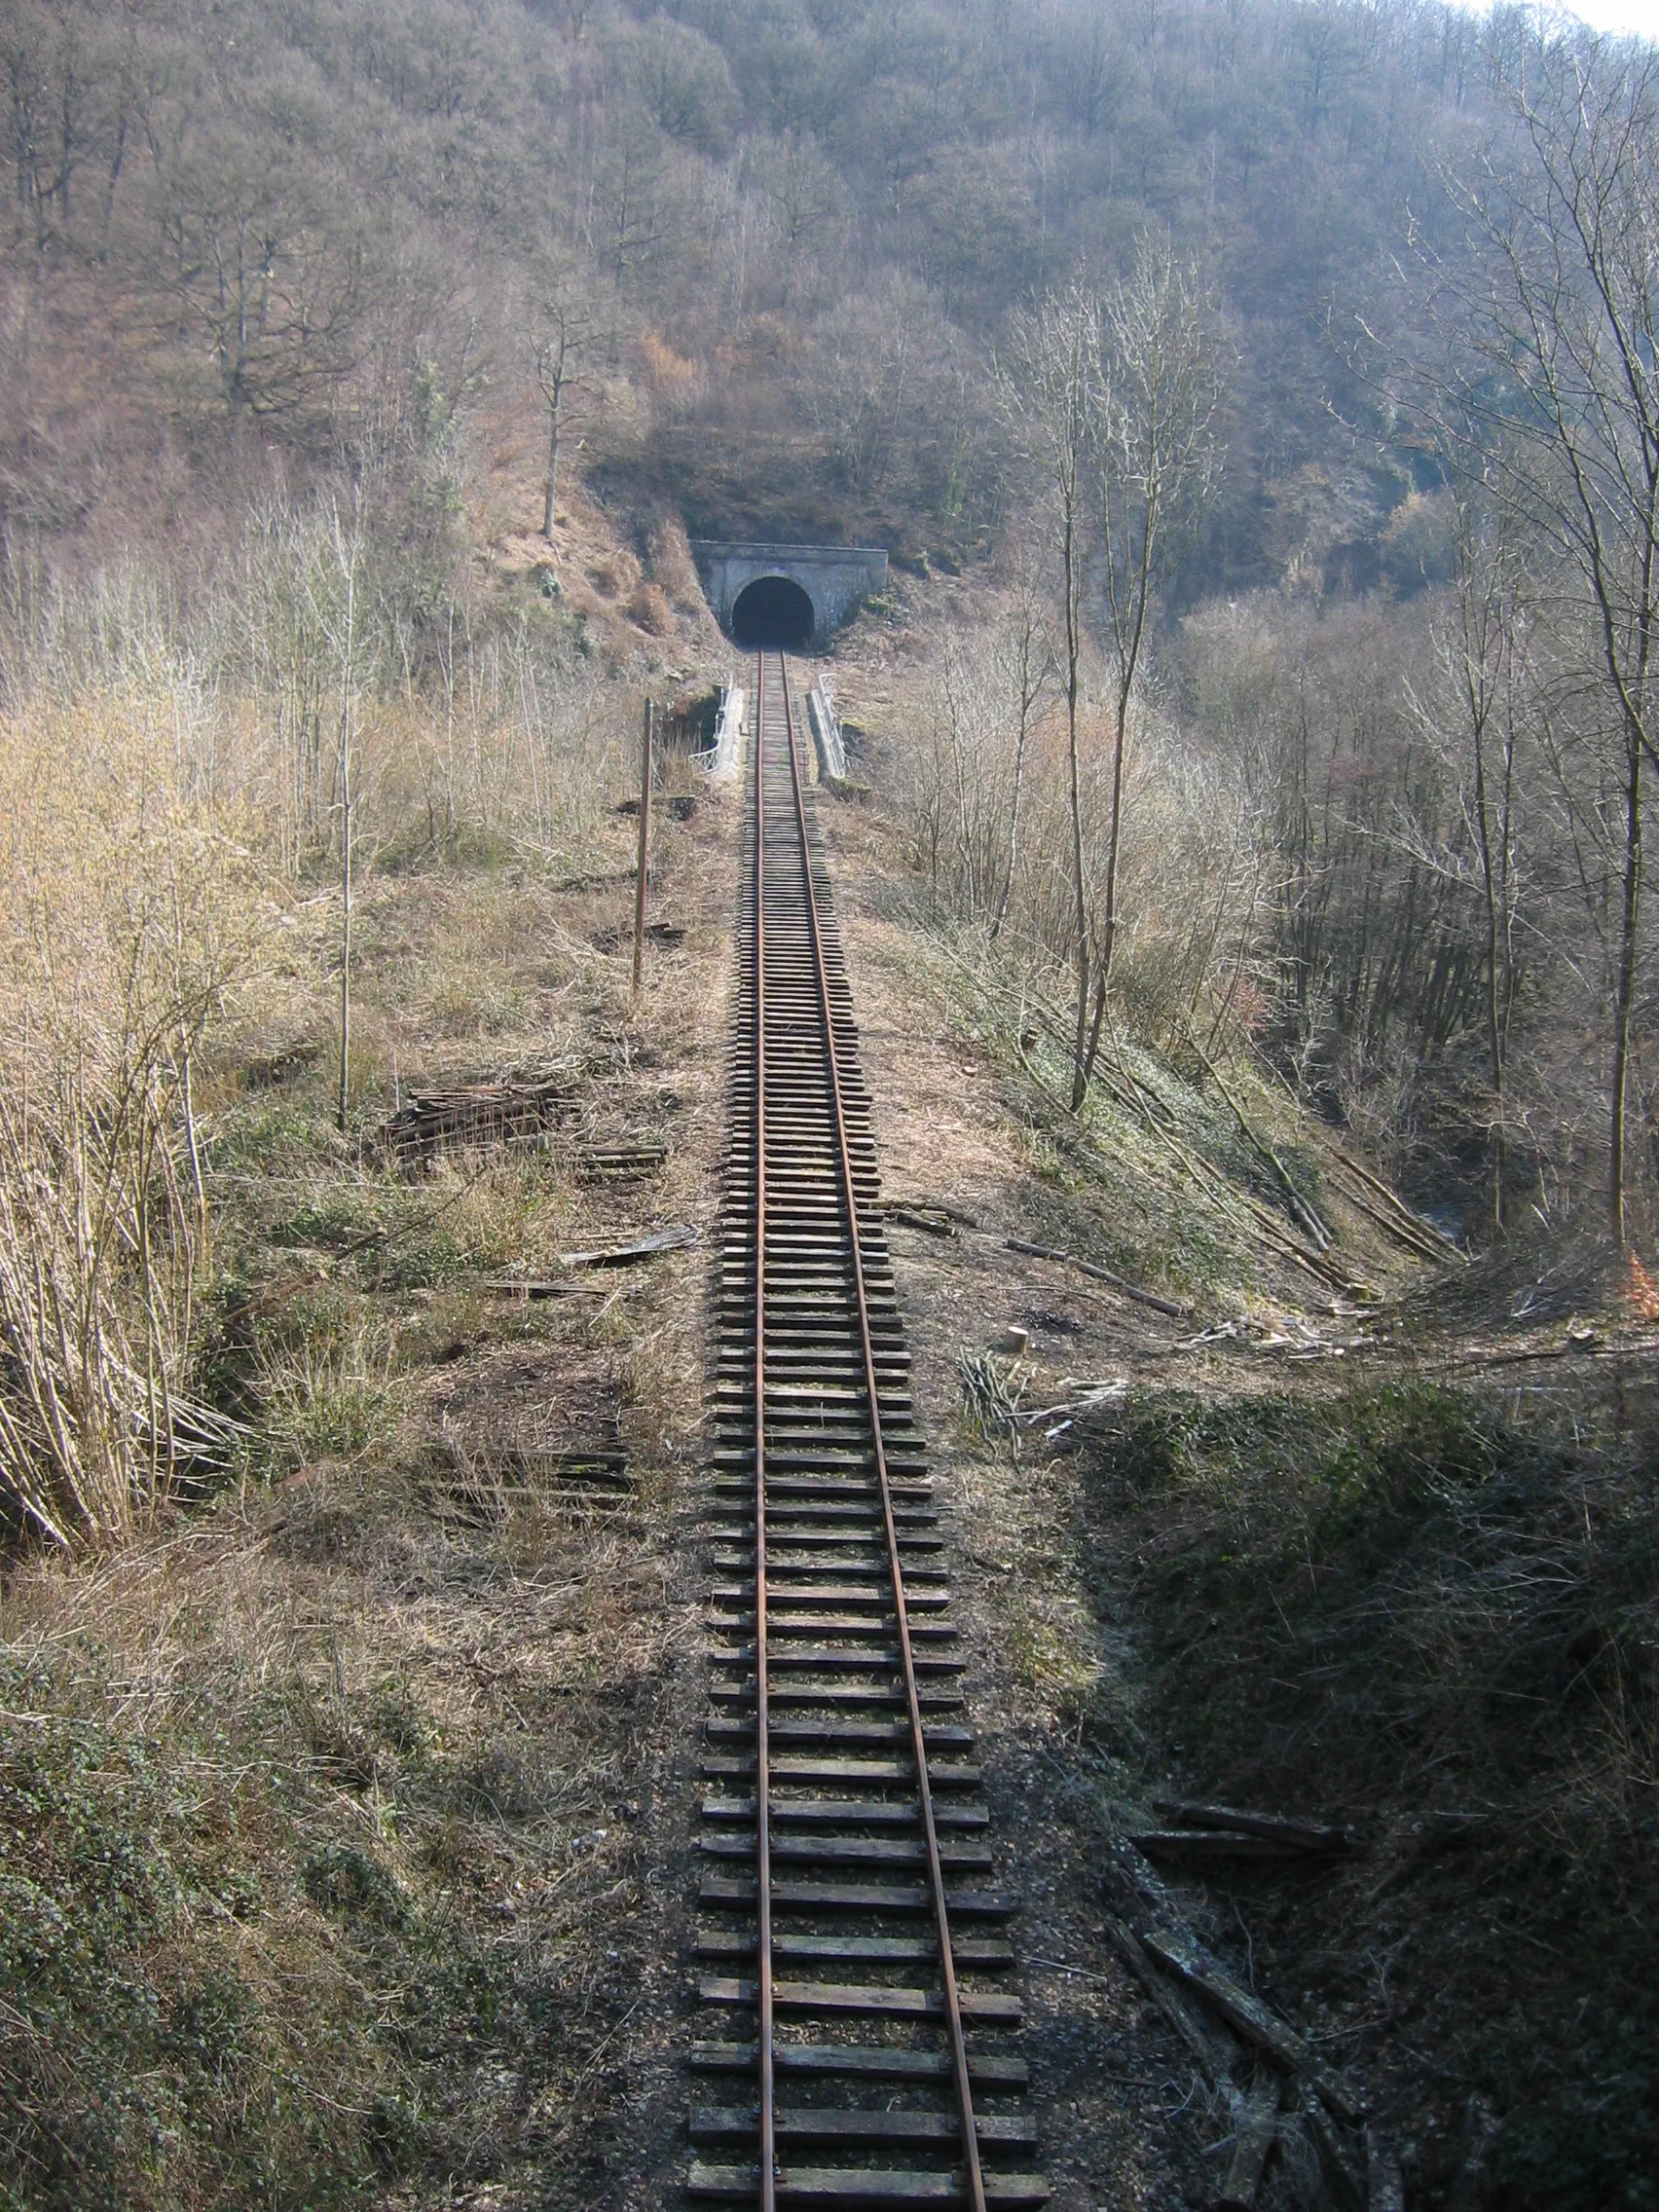 Photo showing: Belgian railway line 128 between Dorinne-Durnal and Purnode, undergoing track reconstruction. An old telephone pole is also visible.